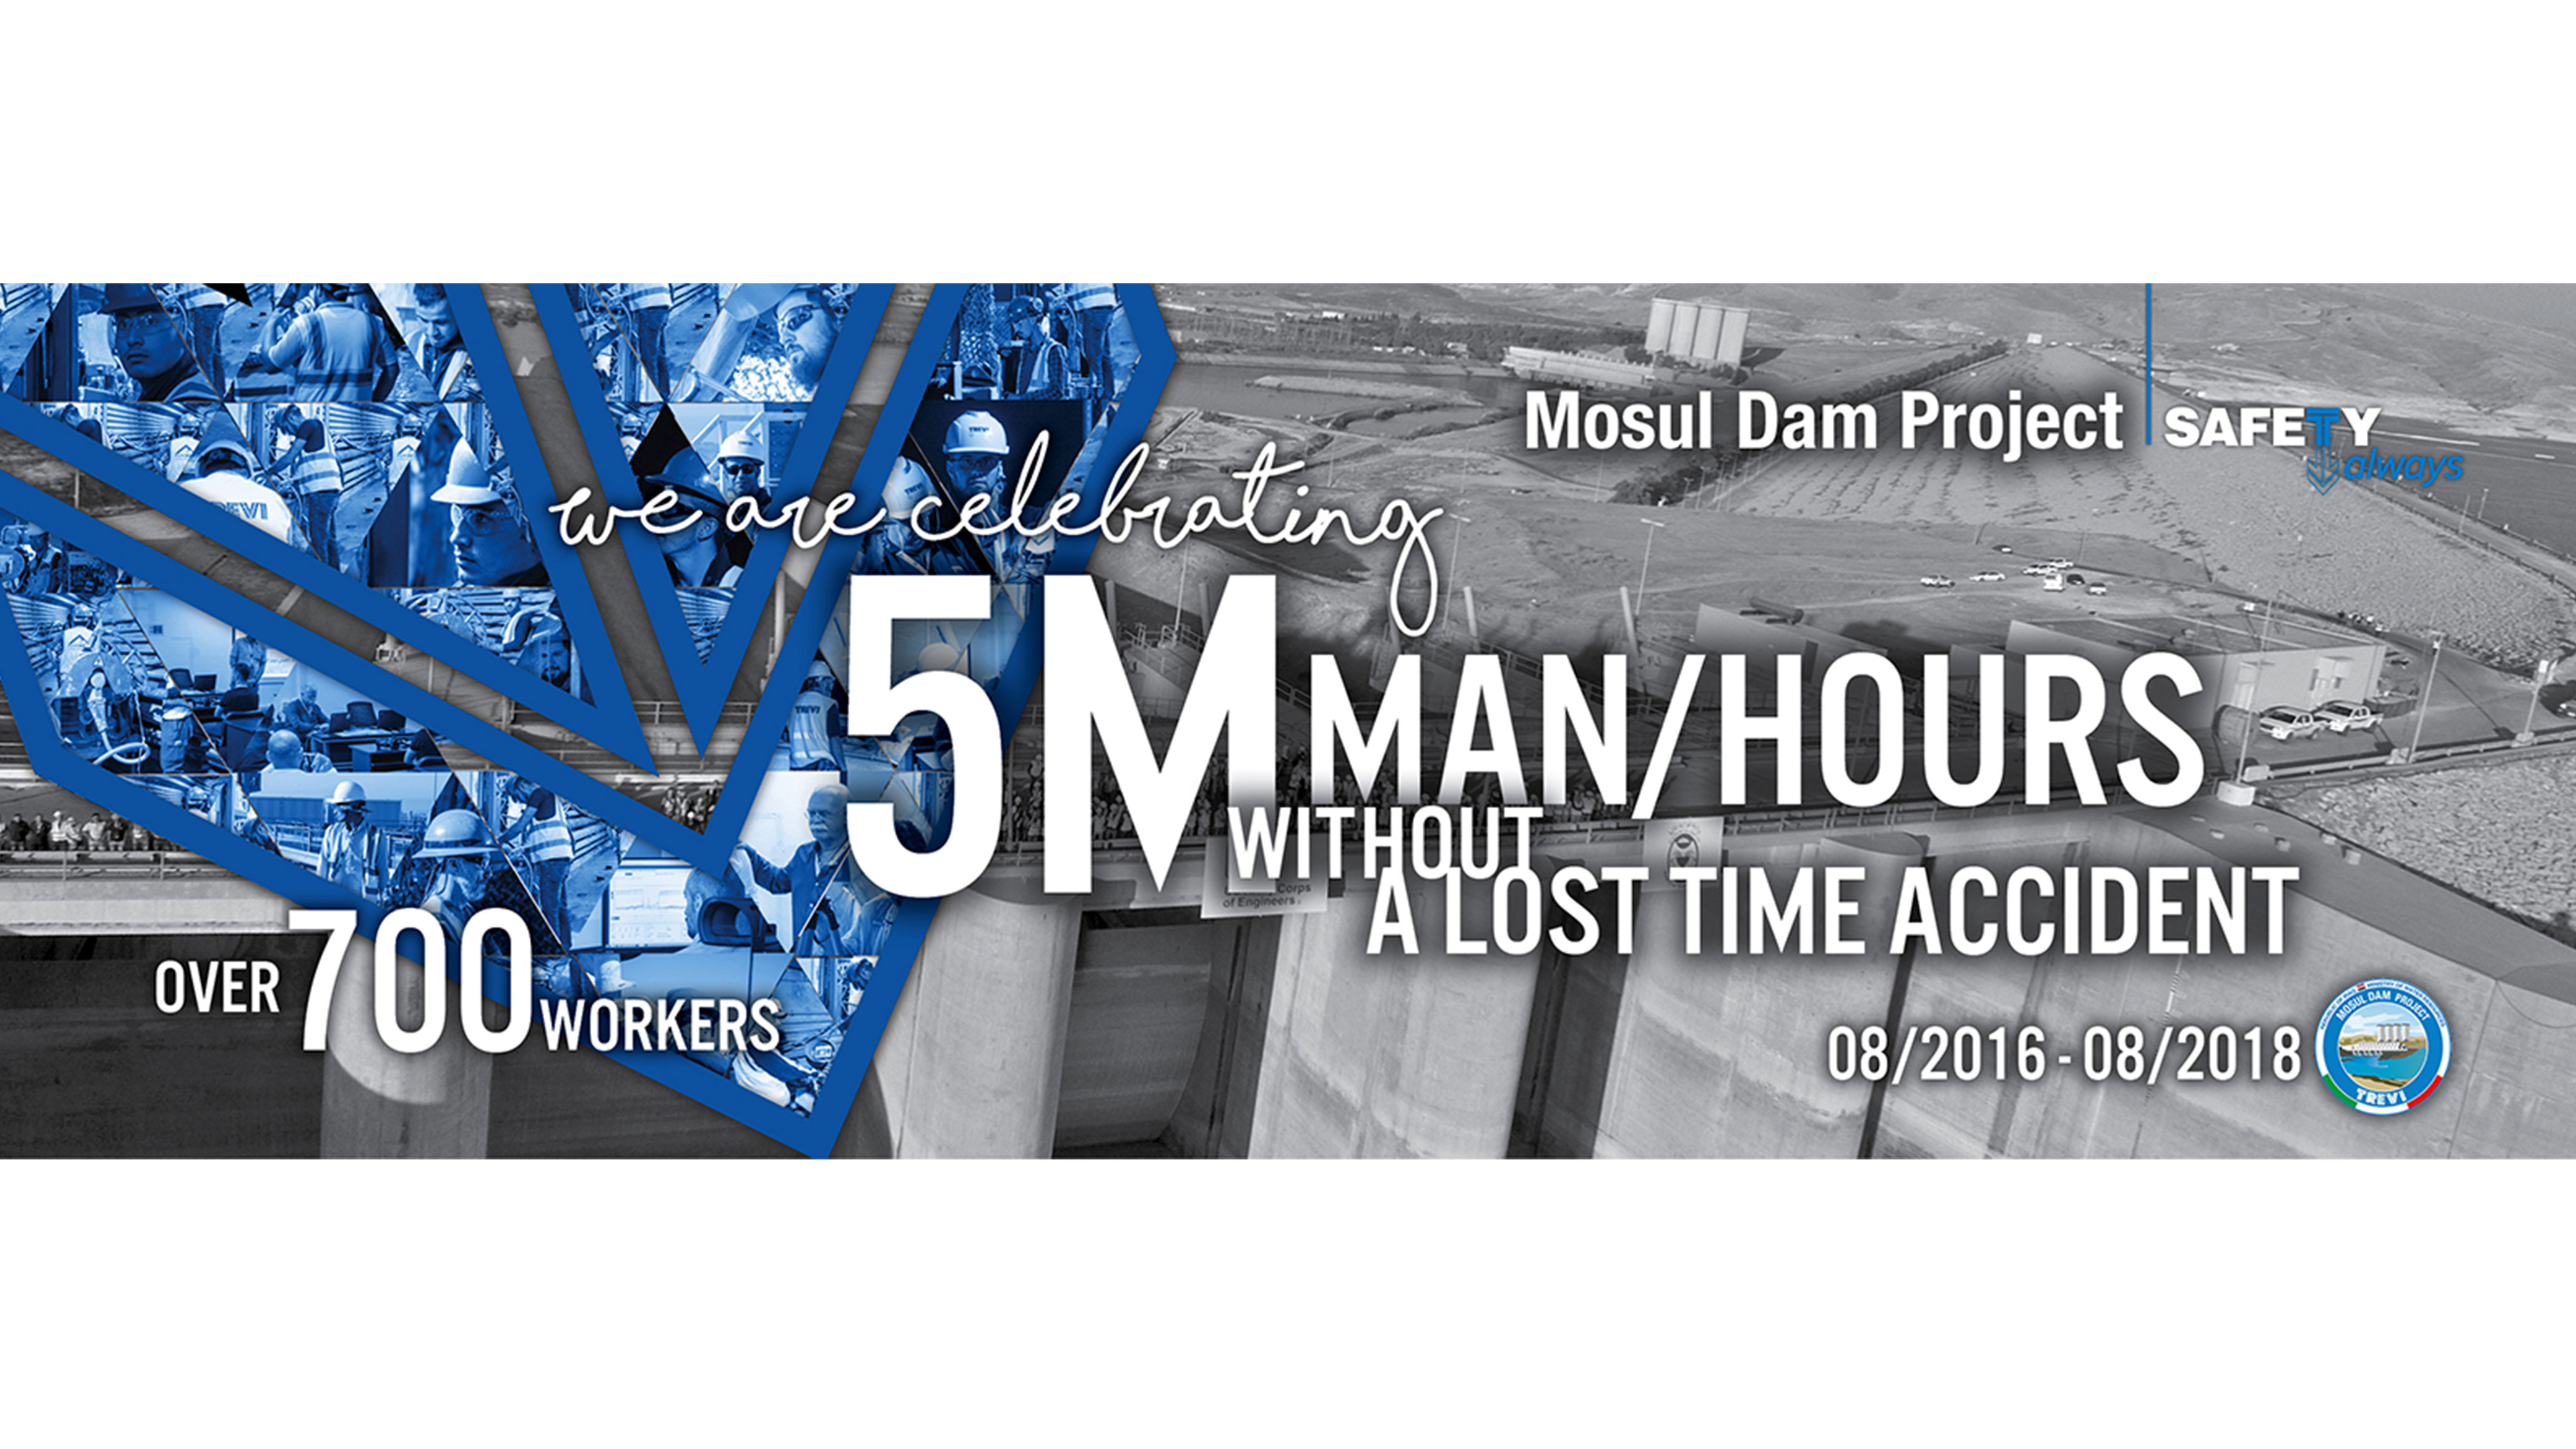 Mosul Dam, 5 million hours worked without accidents | Trevi 1